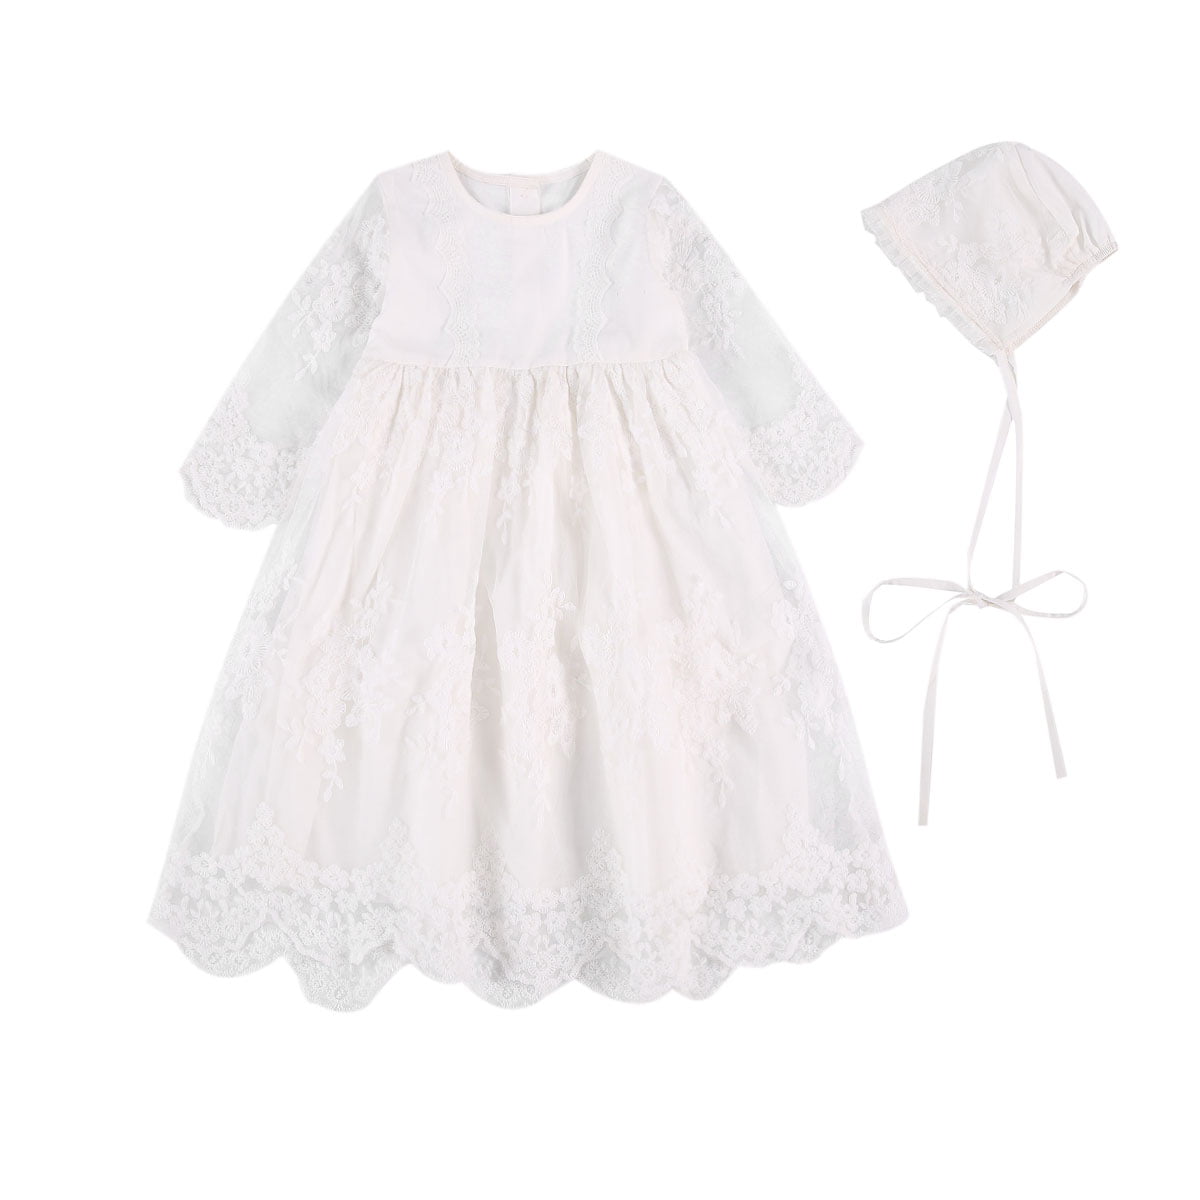 OBEEII Baby Girl Christening Baptism Gown Flower Embroidery Tutu Dress Special Occasion 